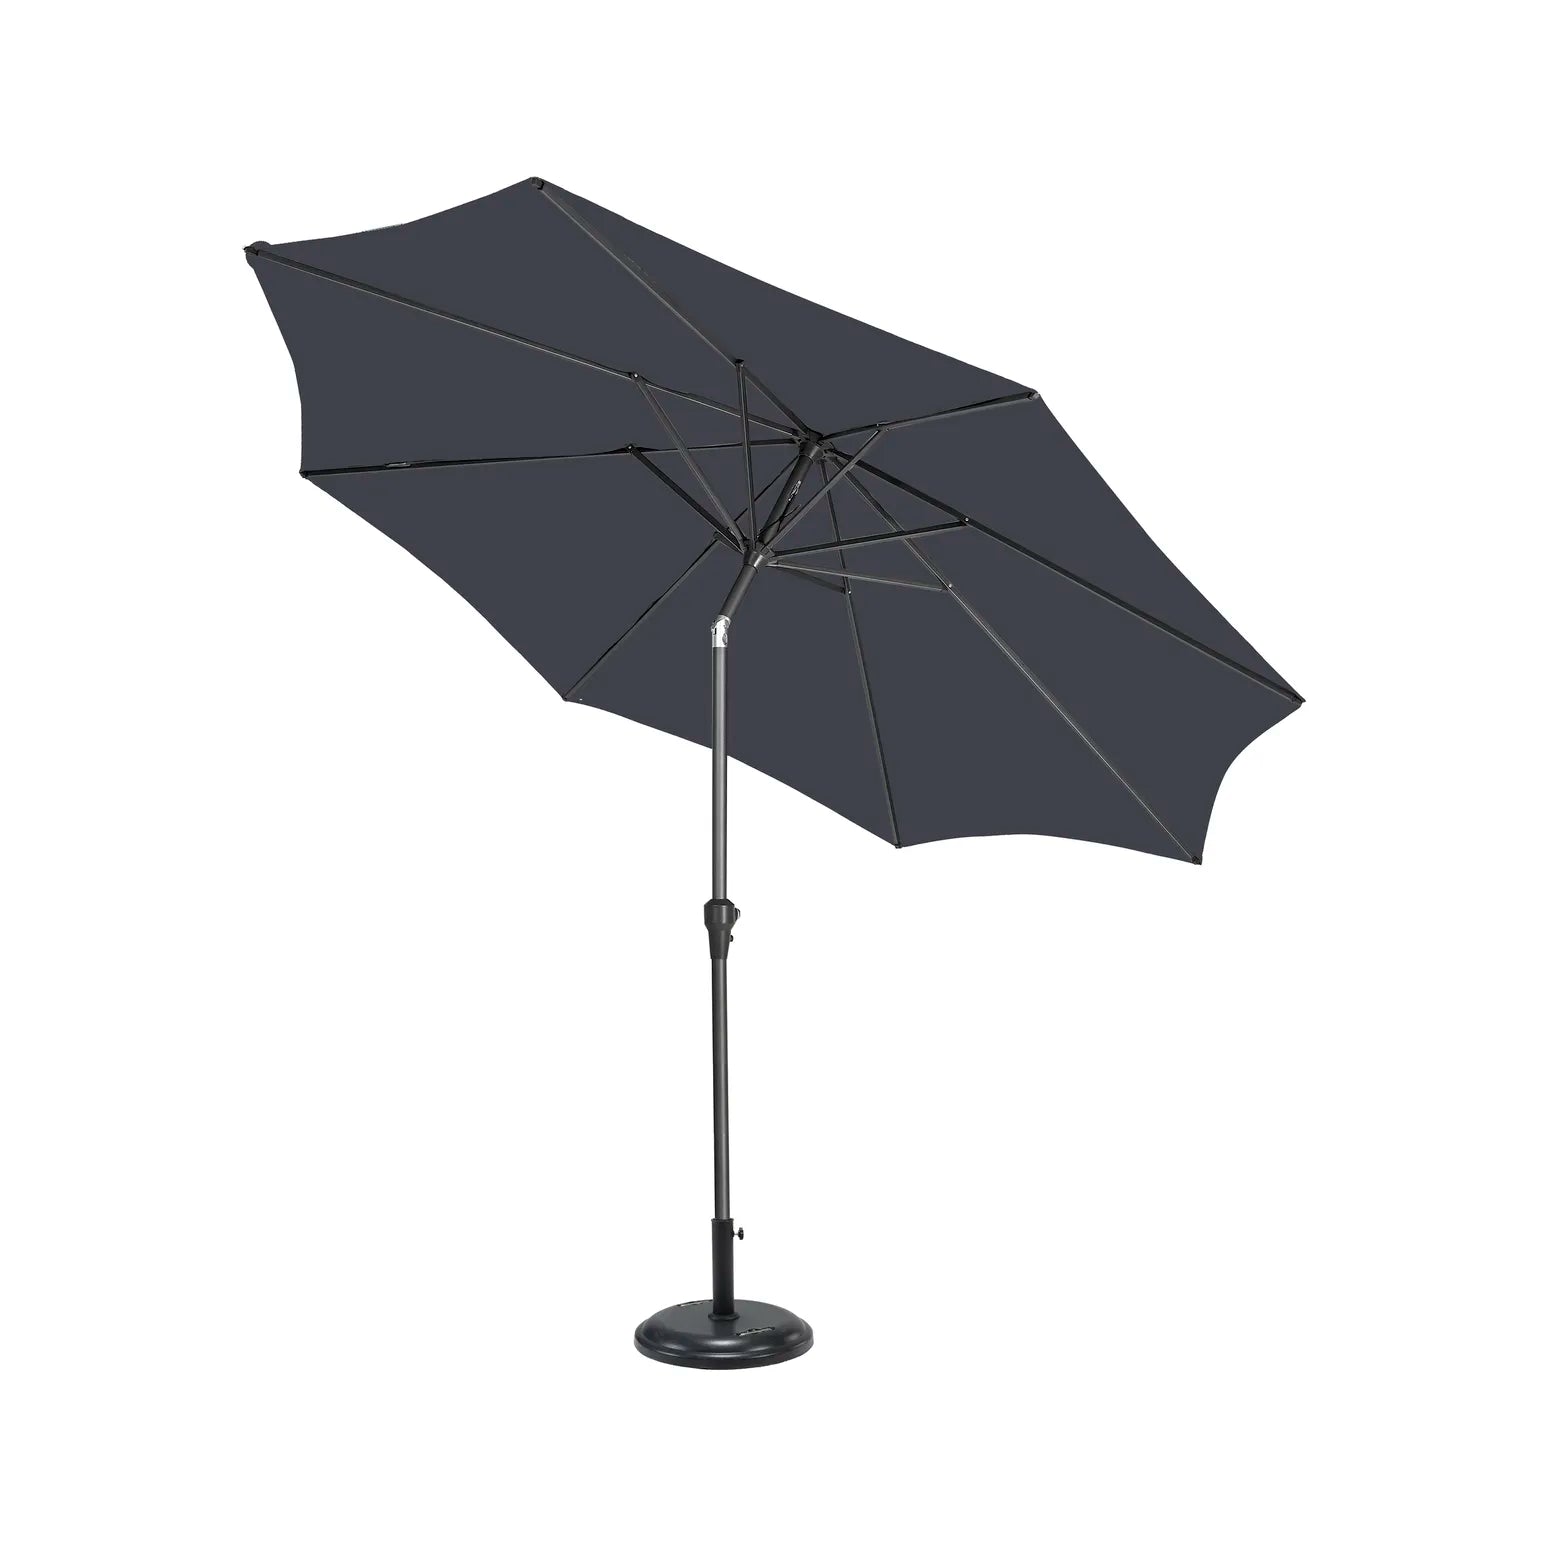 Platinum Riva 3m Round Centre Pole Parasol in Anthracite Grey – Click Style